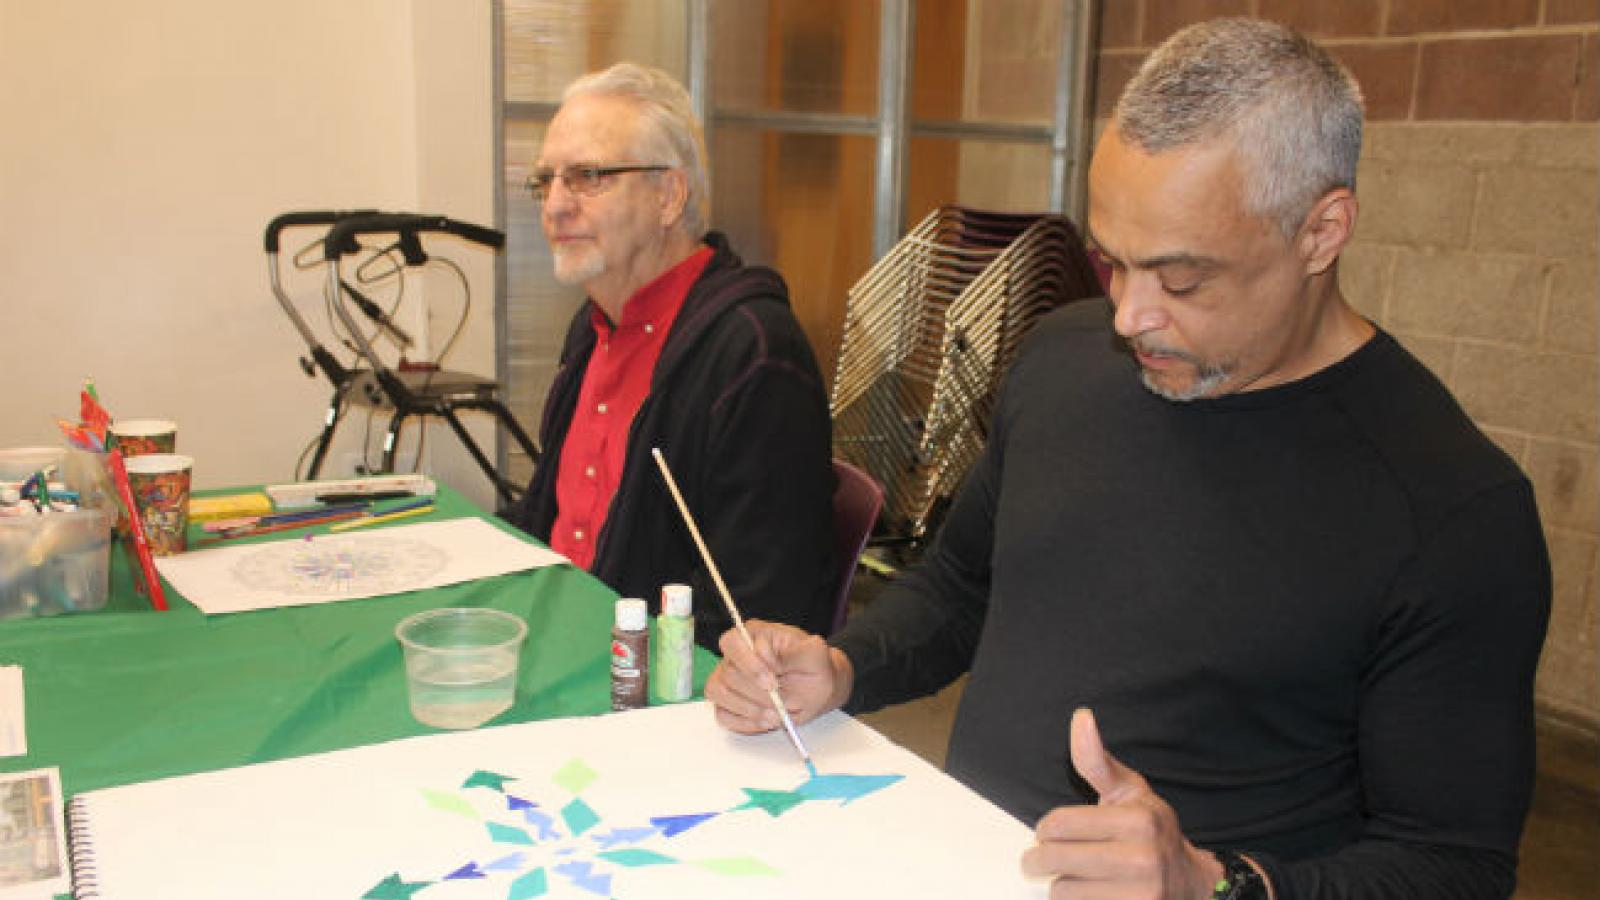 Two older men sit and paint at a table